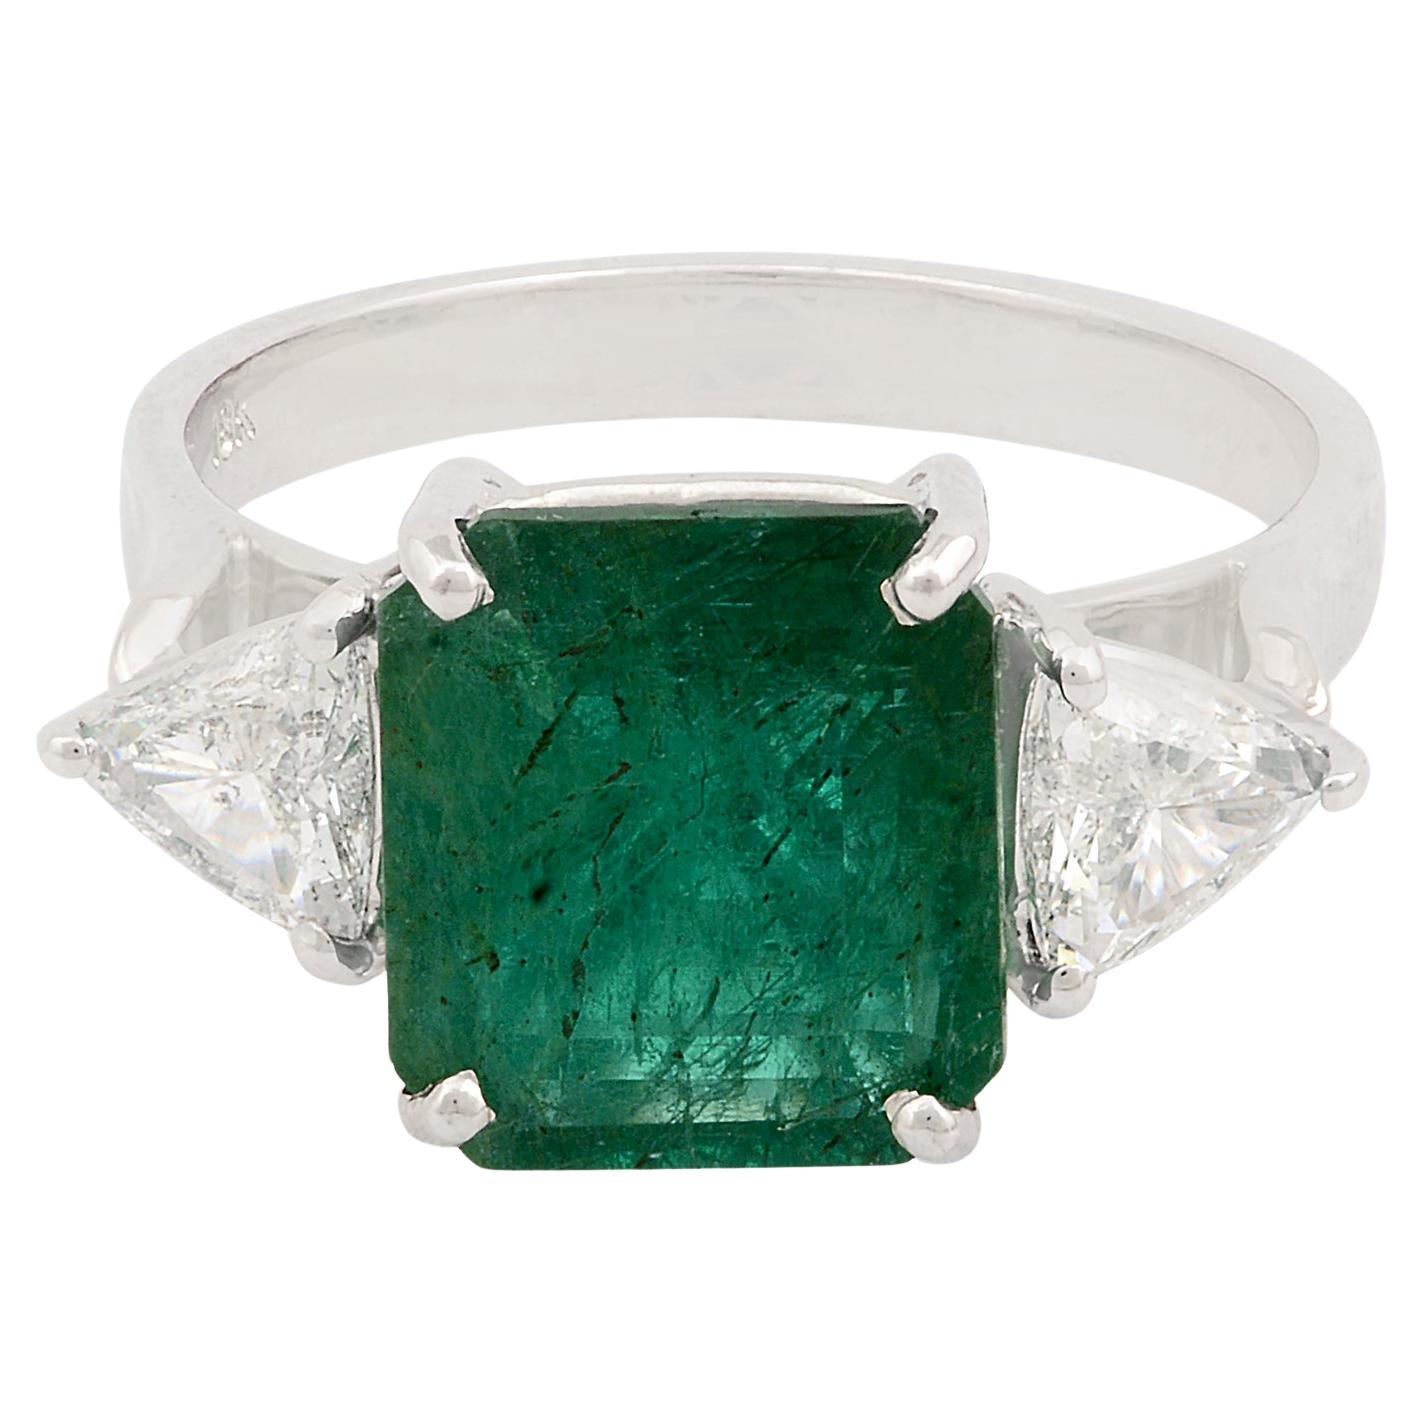 Zambian Emerald Gemstone Cocktail Ring Pear Diamond Solid 18k White Gold Jewelry For Sale